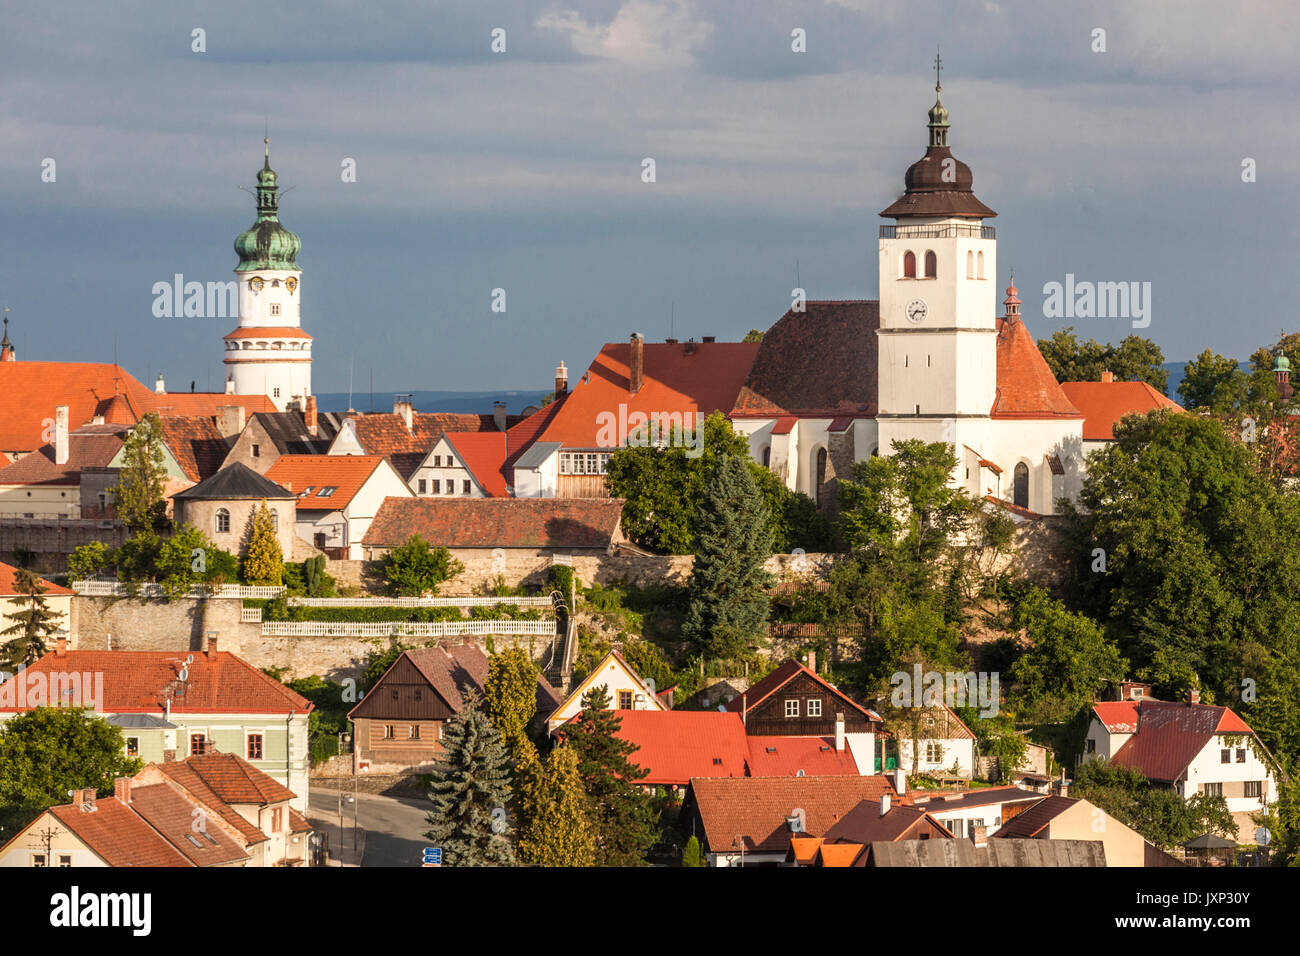 Nove Mesto Nad Metuji, cityscape with tower of Church and Castle tower Stock Photo